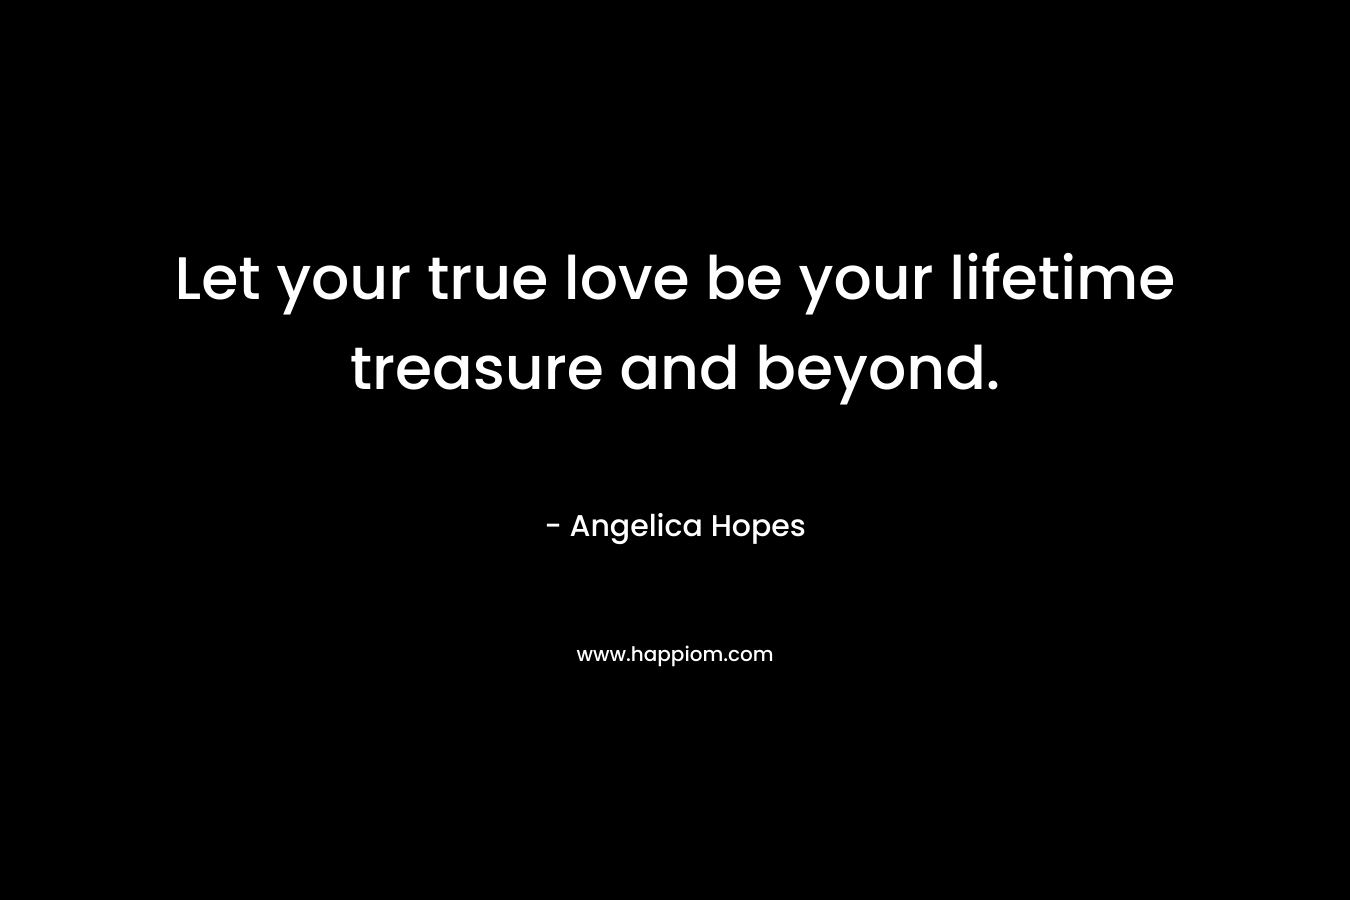 Let your true love be your lifetime treasure and beyond. – Angelica Hopes